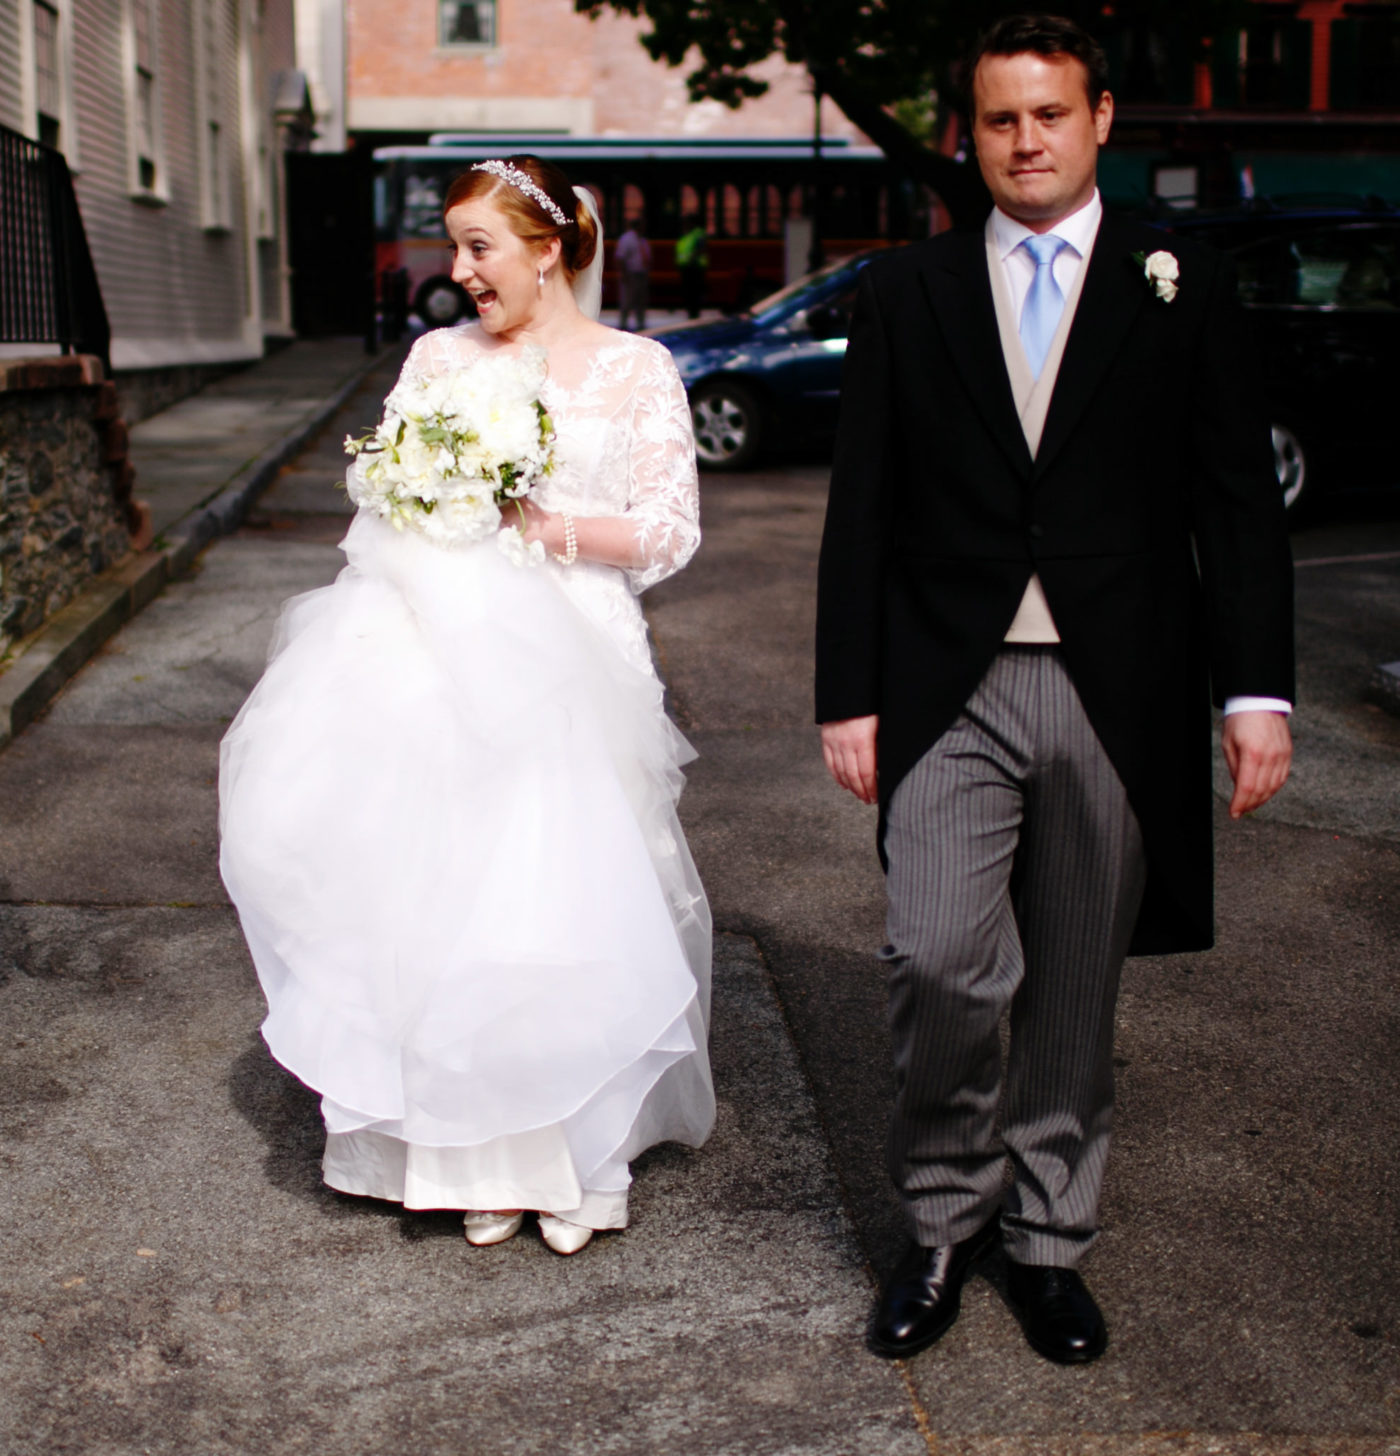 A Summer Wedding at Trinity Church, Newport RI. And all permeated with a British flair!